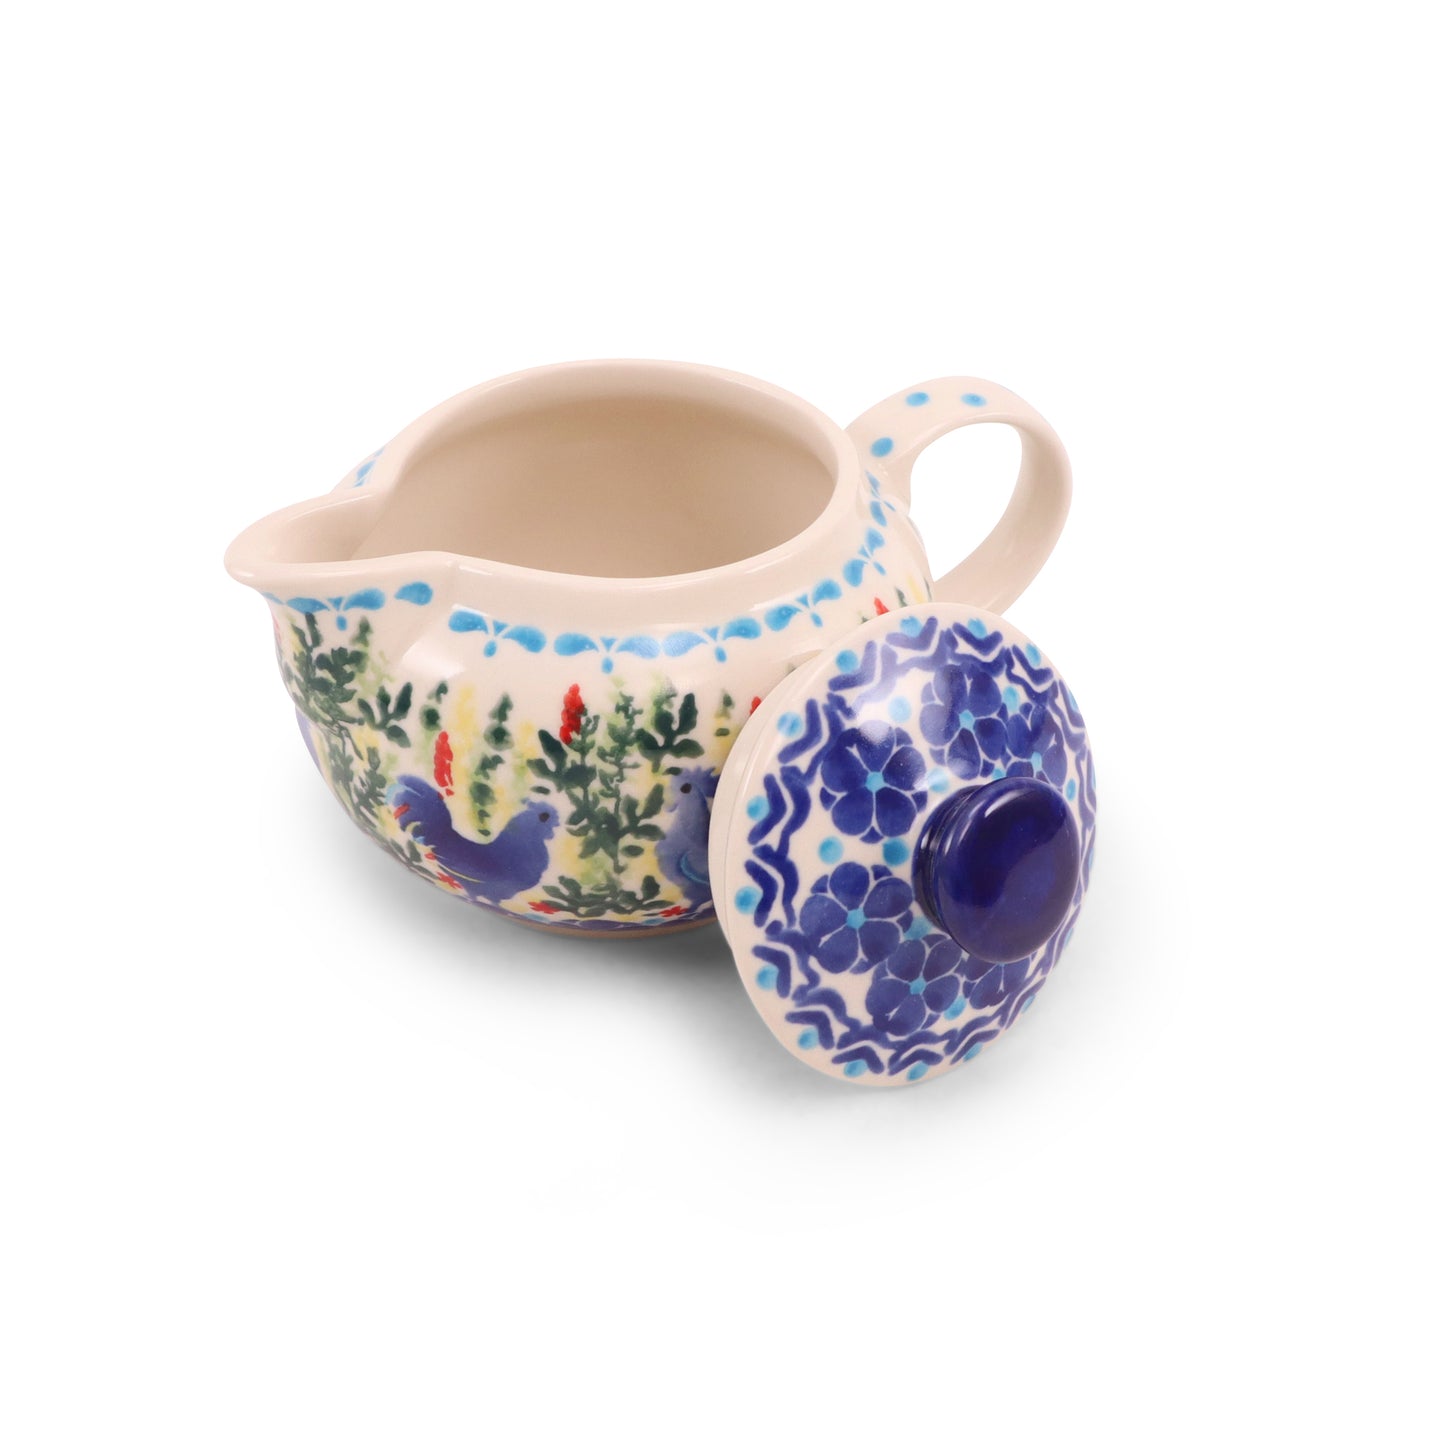 6oz Creamer with Lid. Pattern: Blue Rooster